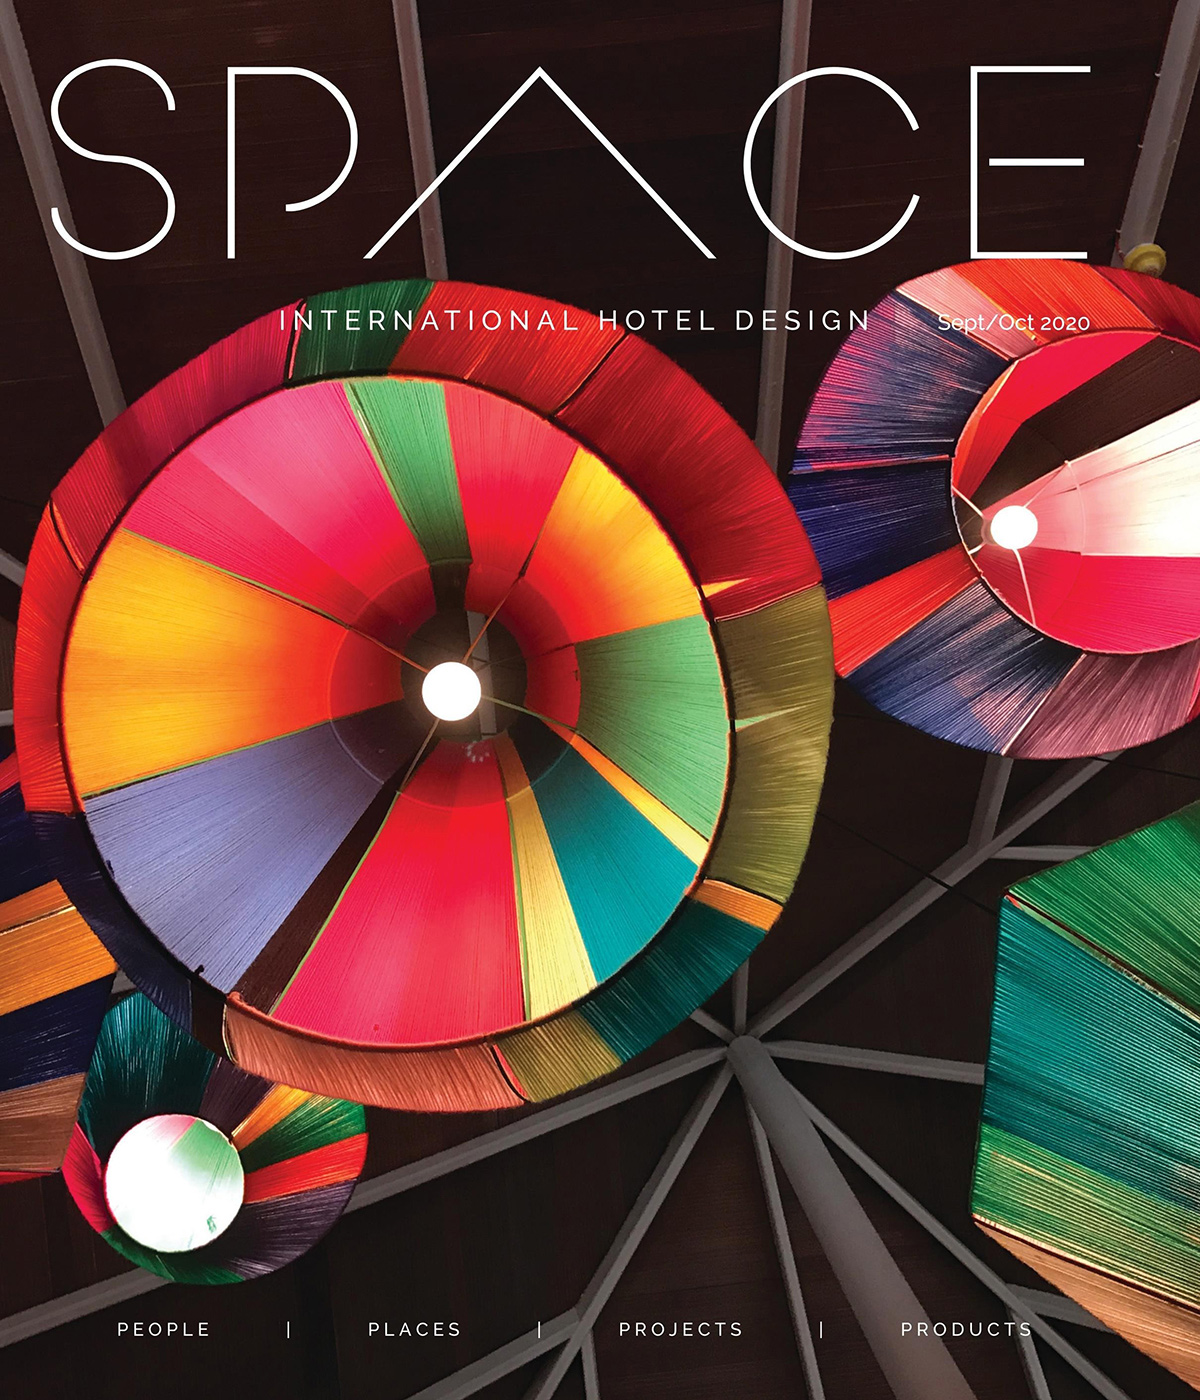 The Space International Hotel Design Magazine cover.